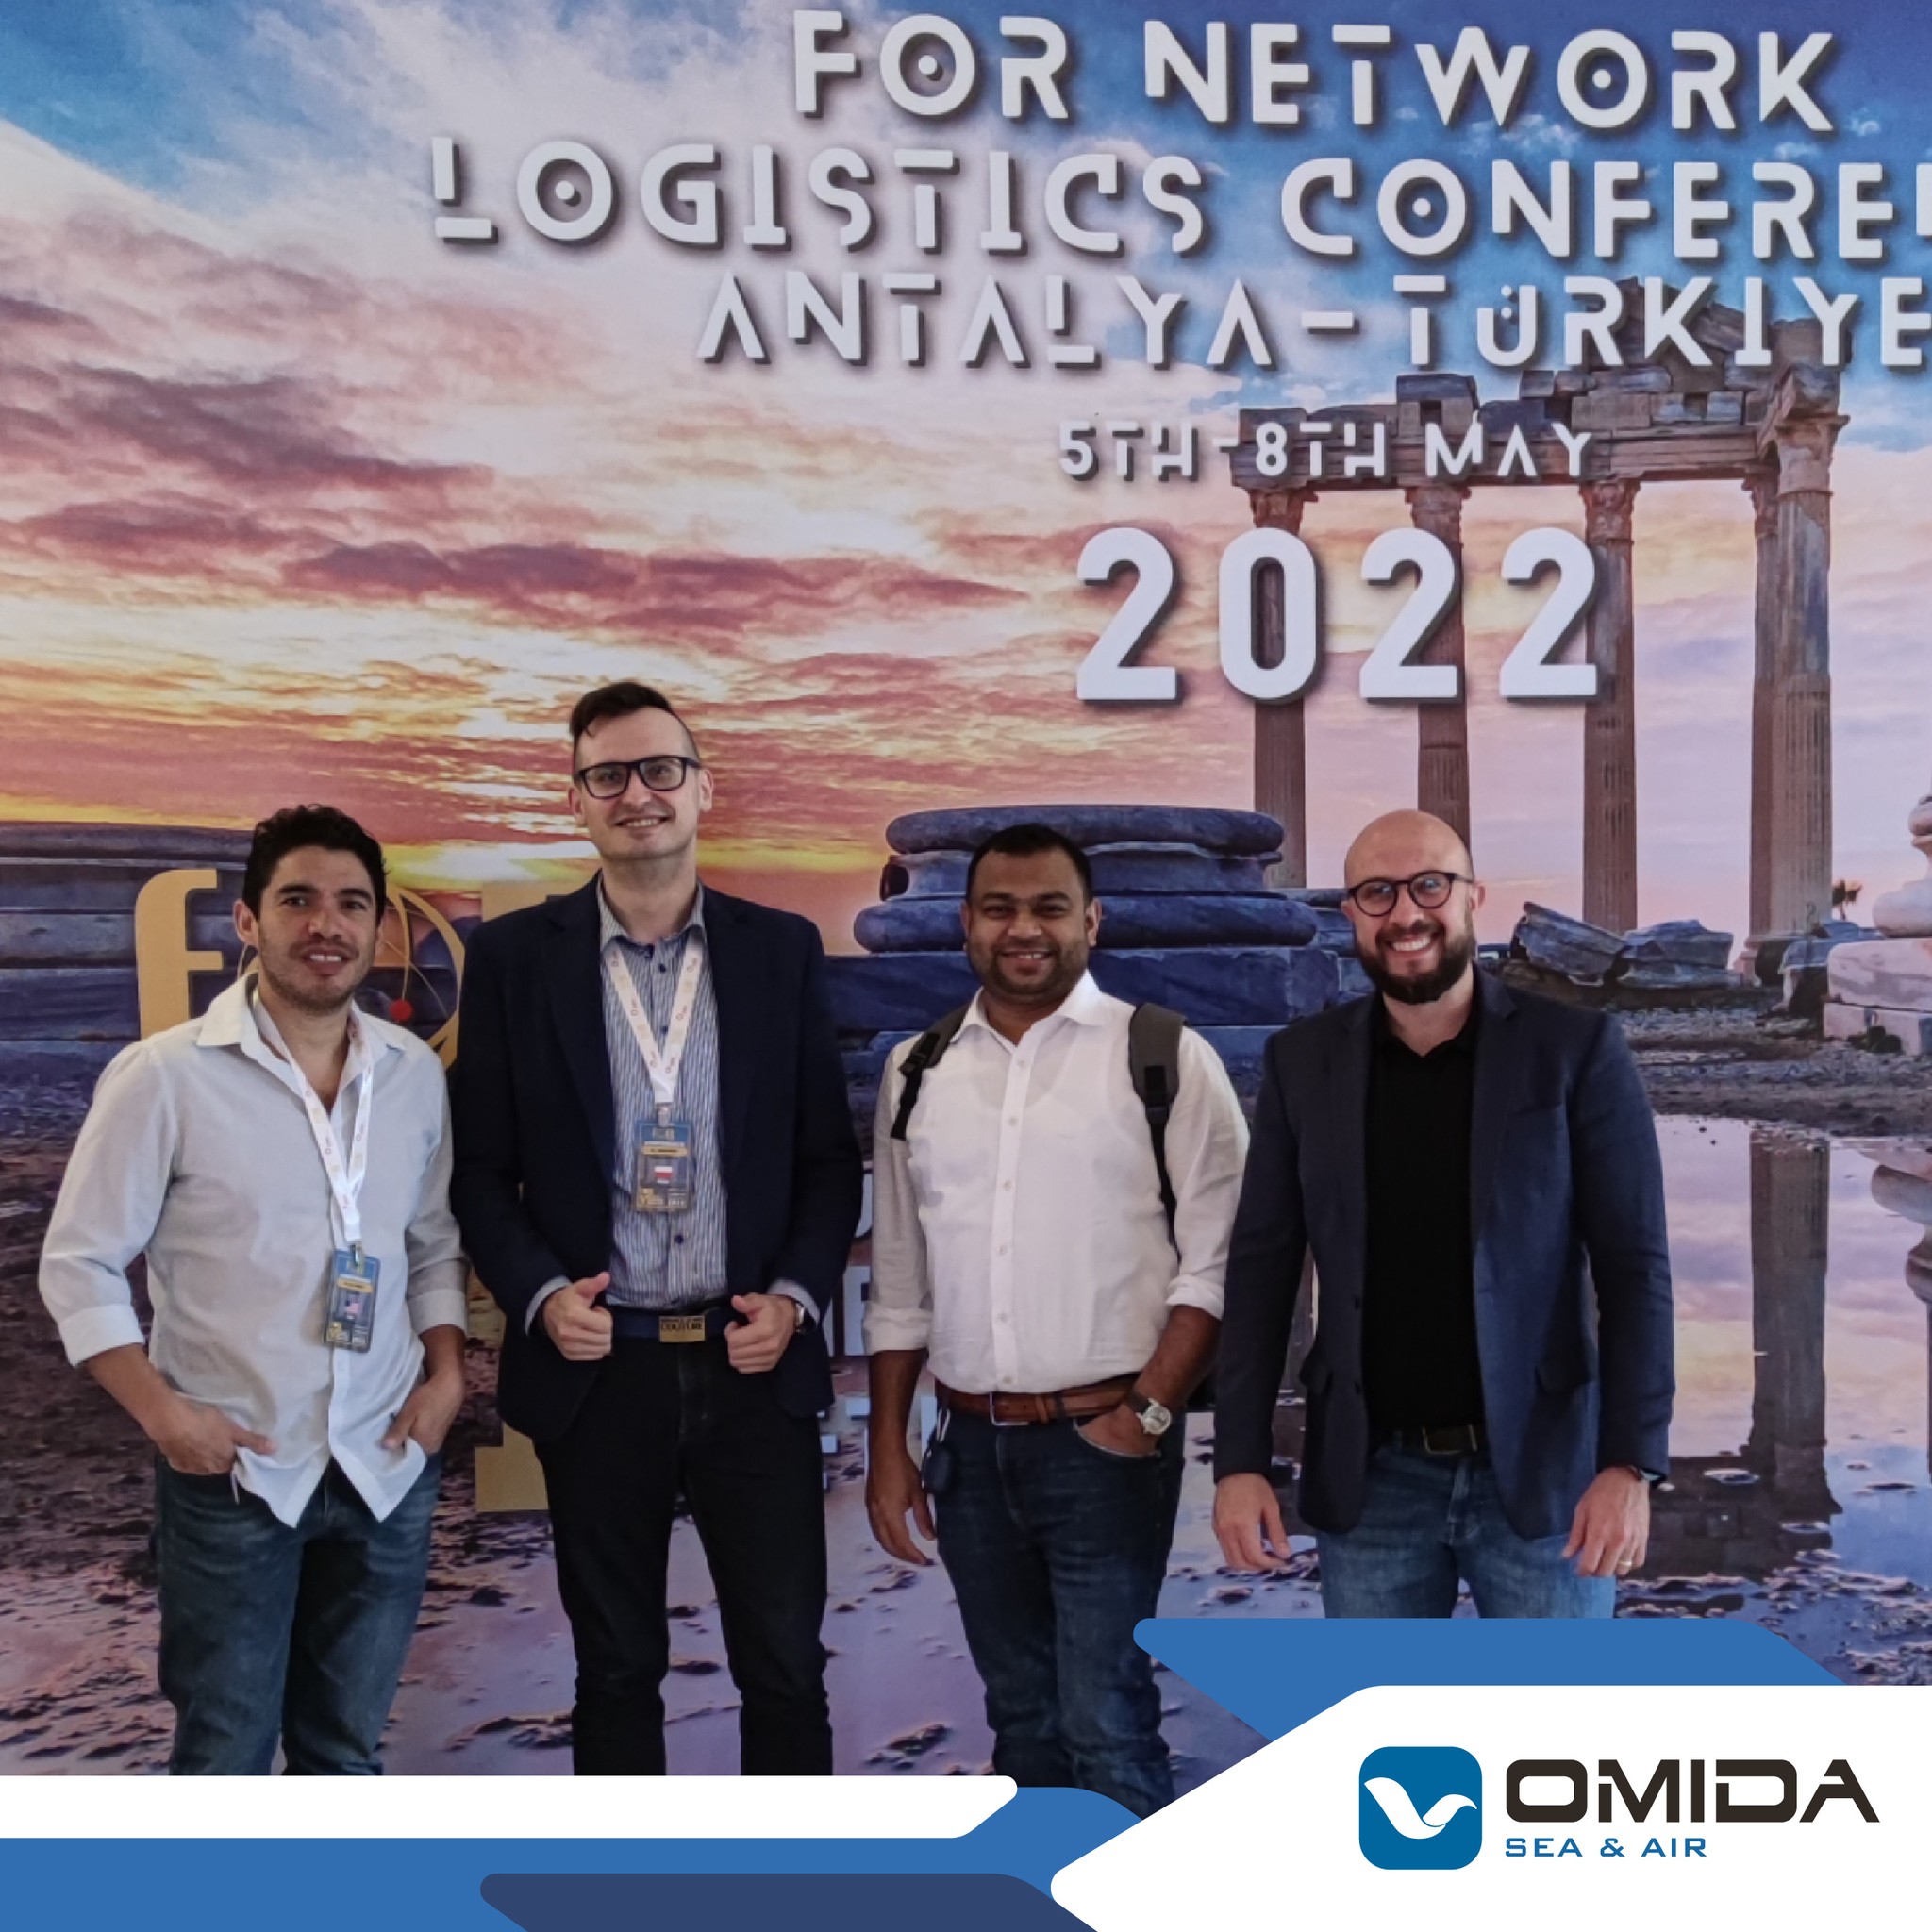  For Network Logistics Conference 2022 4 osoby